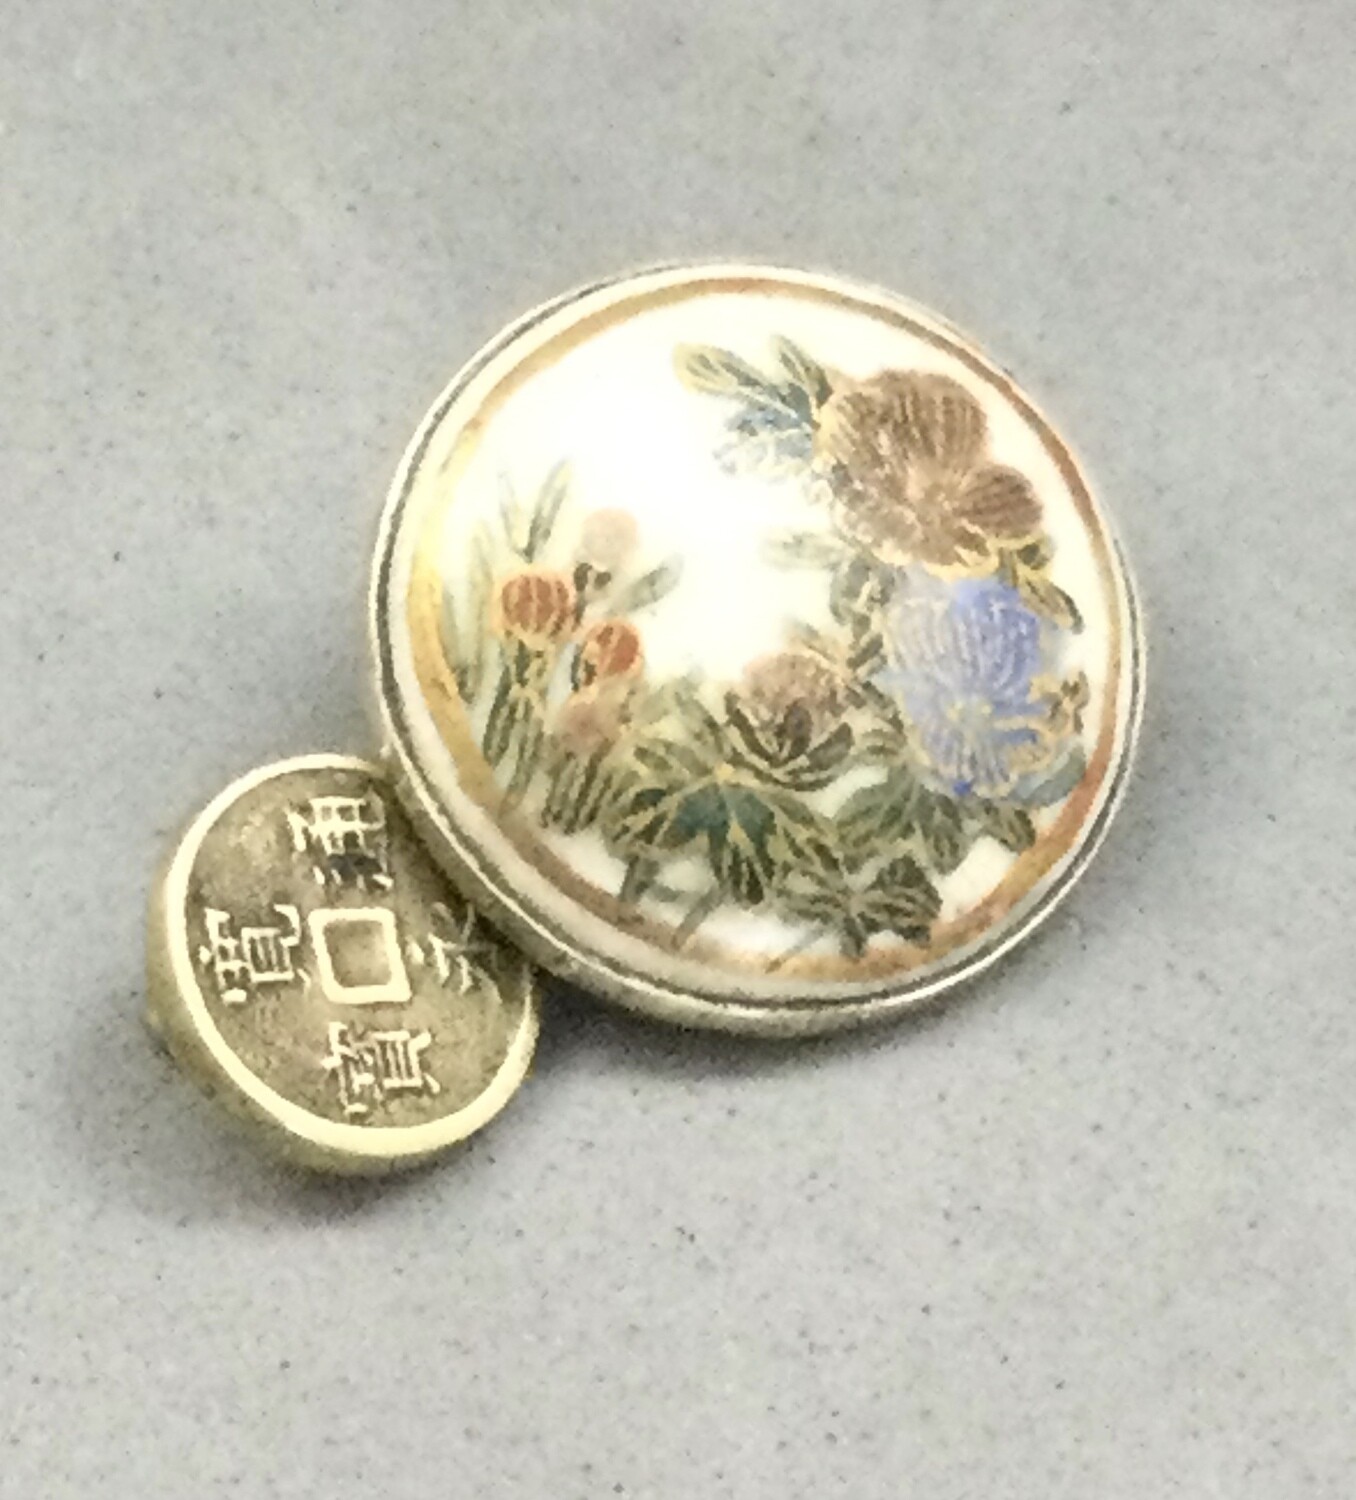 Small Satsuma Mounted in Metal with 
Original attached Coin Button